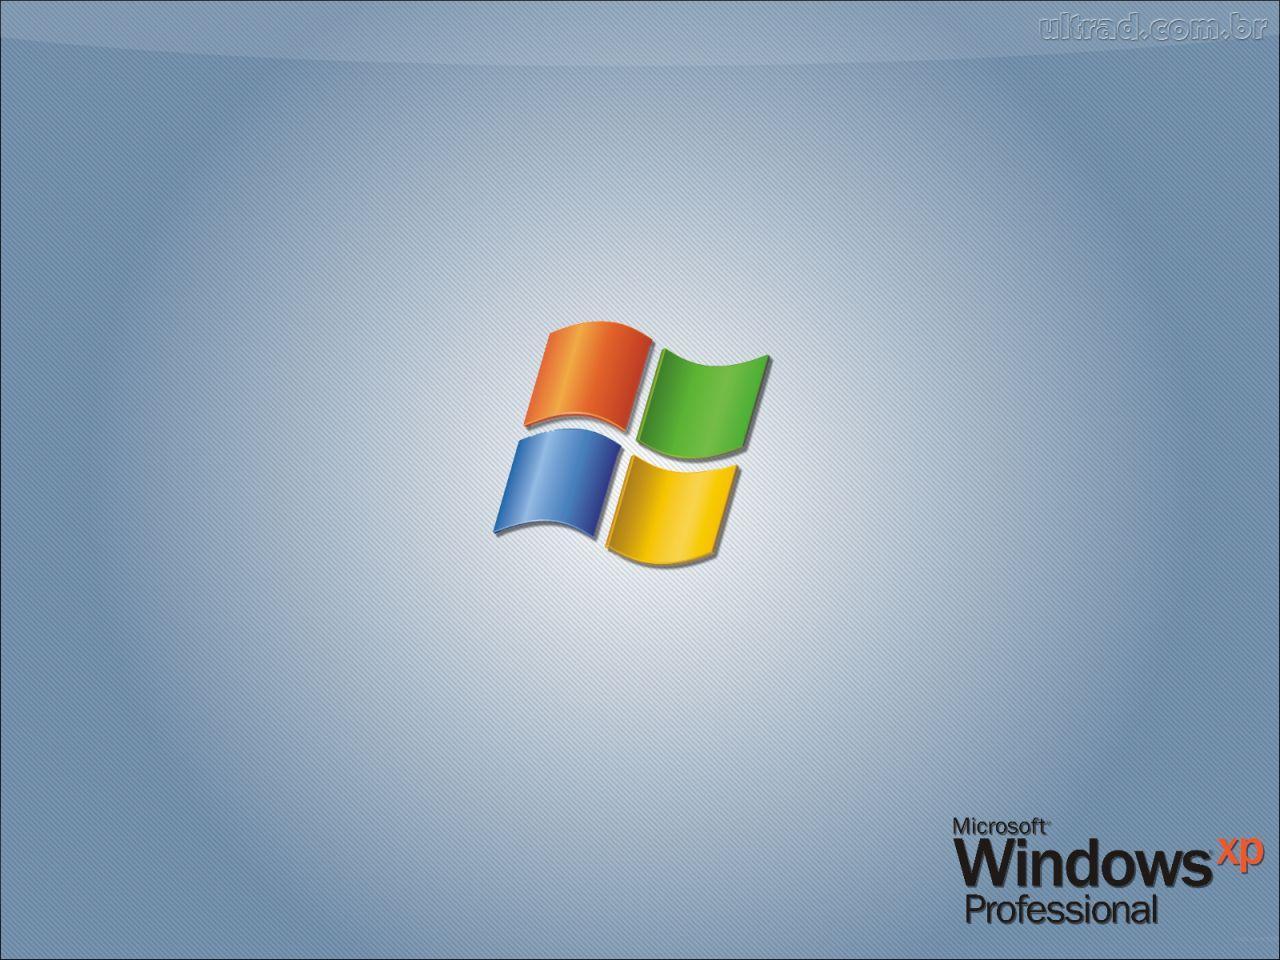 Wallpapers For > Microsoft Windows Xp Professional Wallpapers